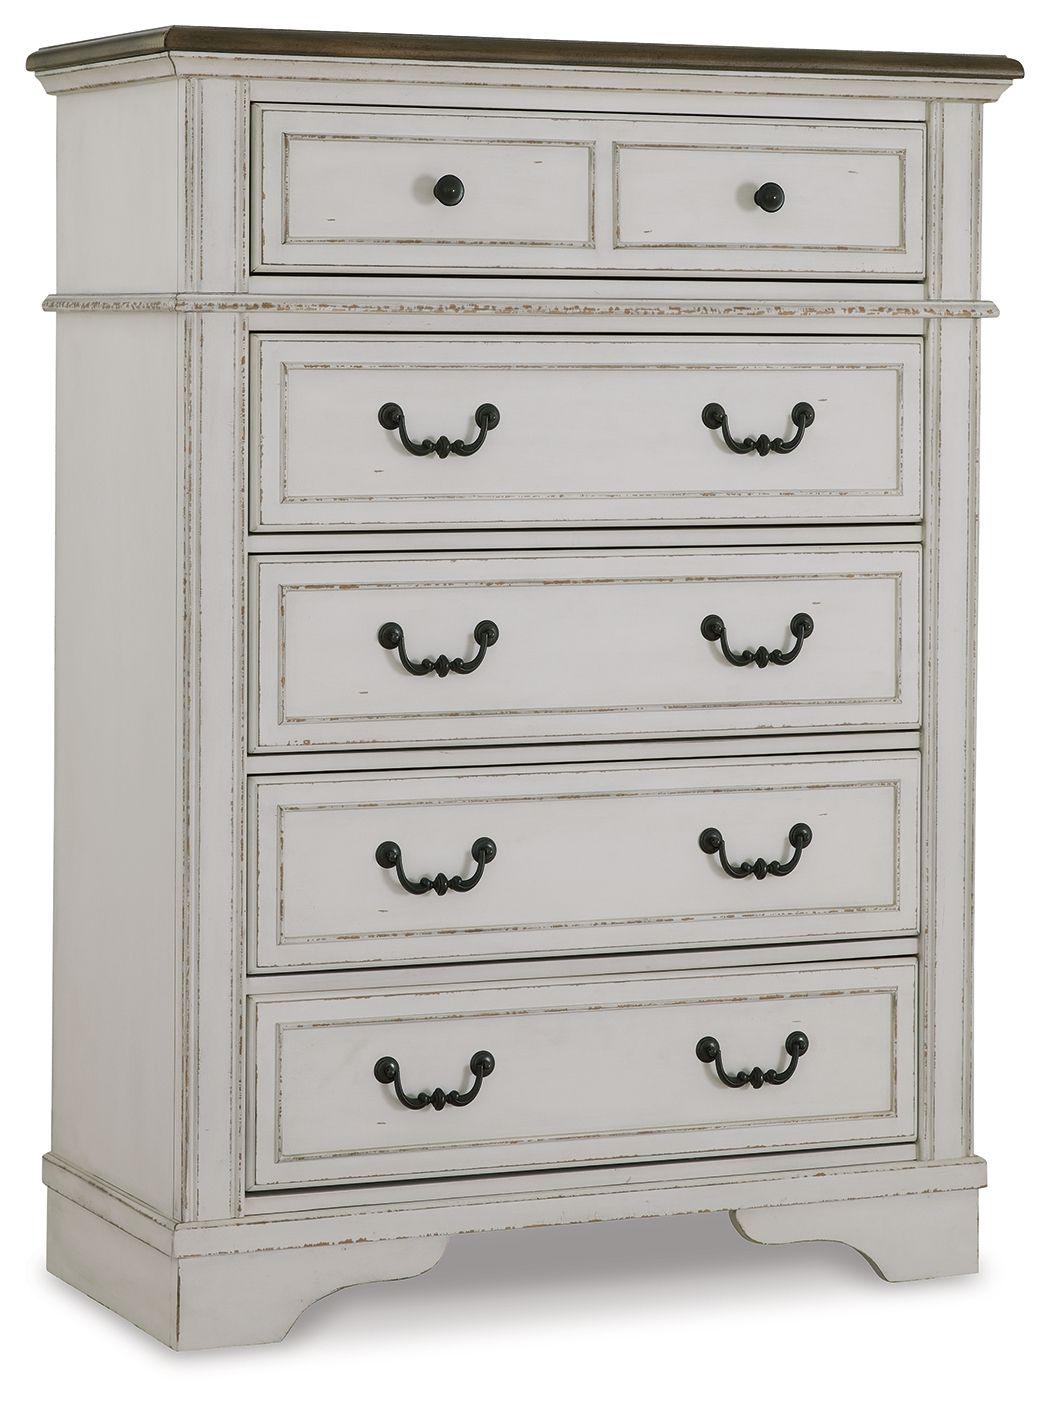 Brollyn - White / Brown / Beige - Five Drawer Chest Tony's Home Furnishings Furniture. Beds. Dressers. Sofas.